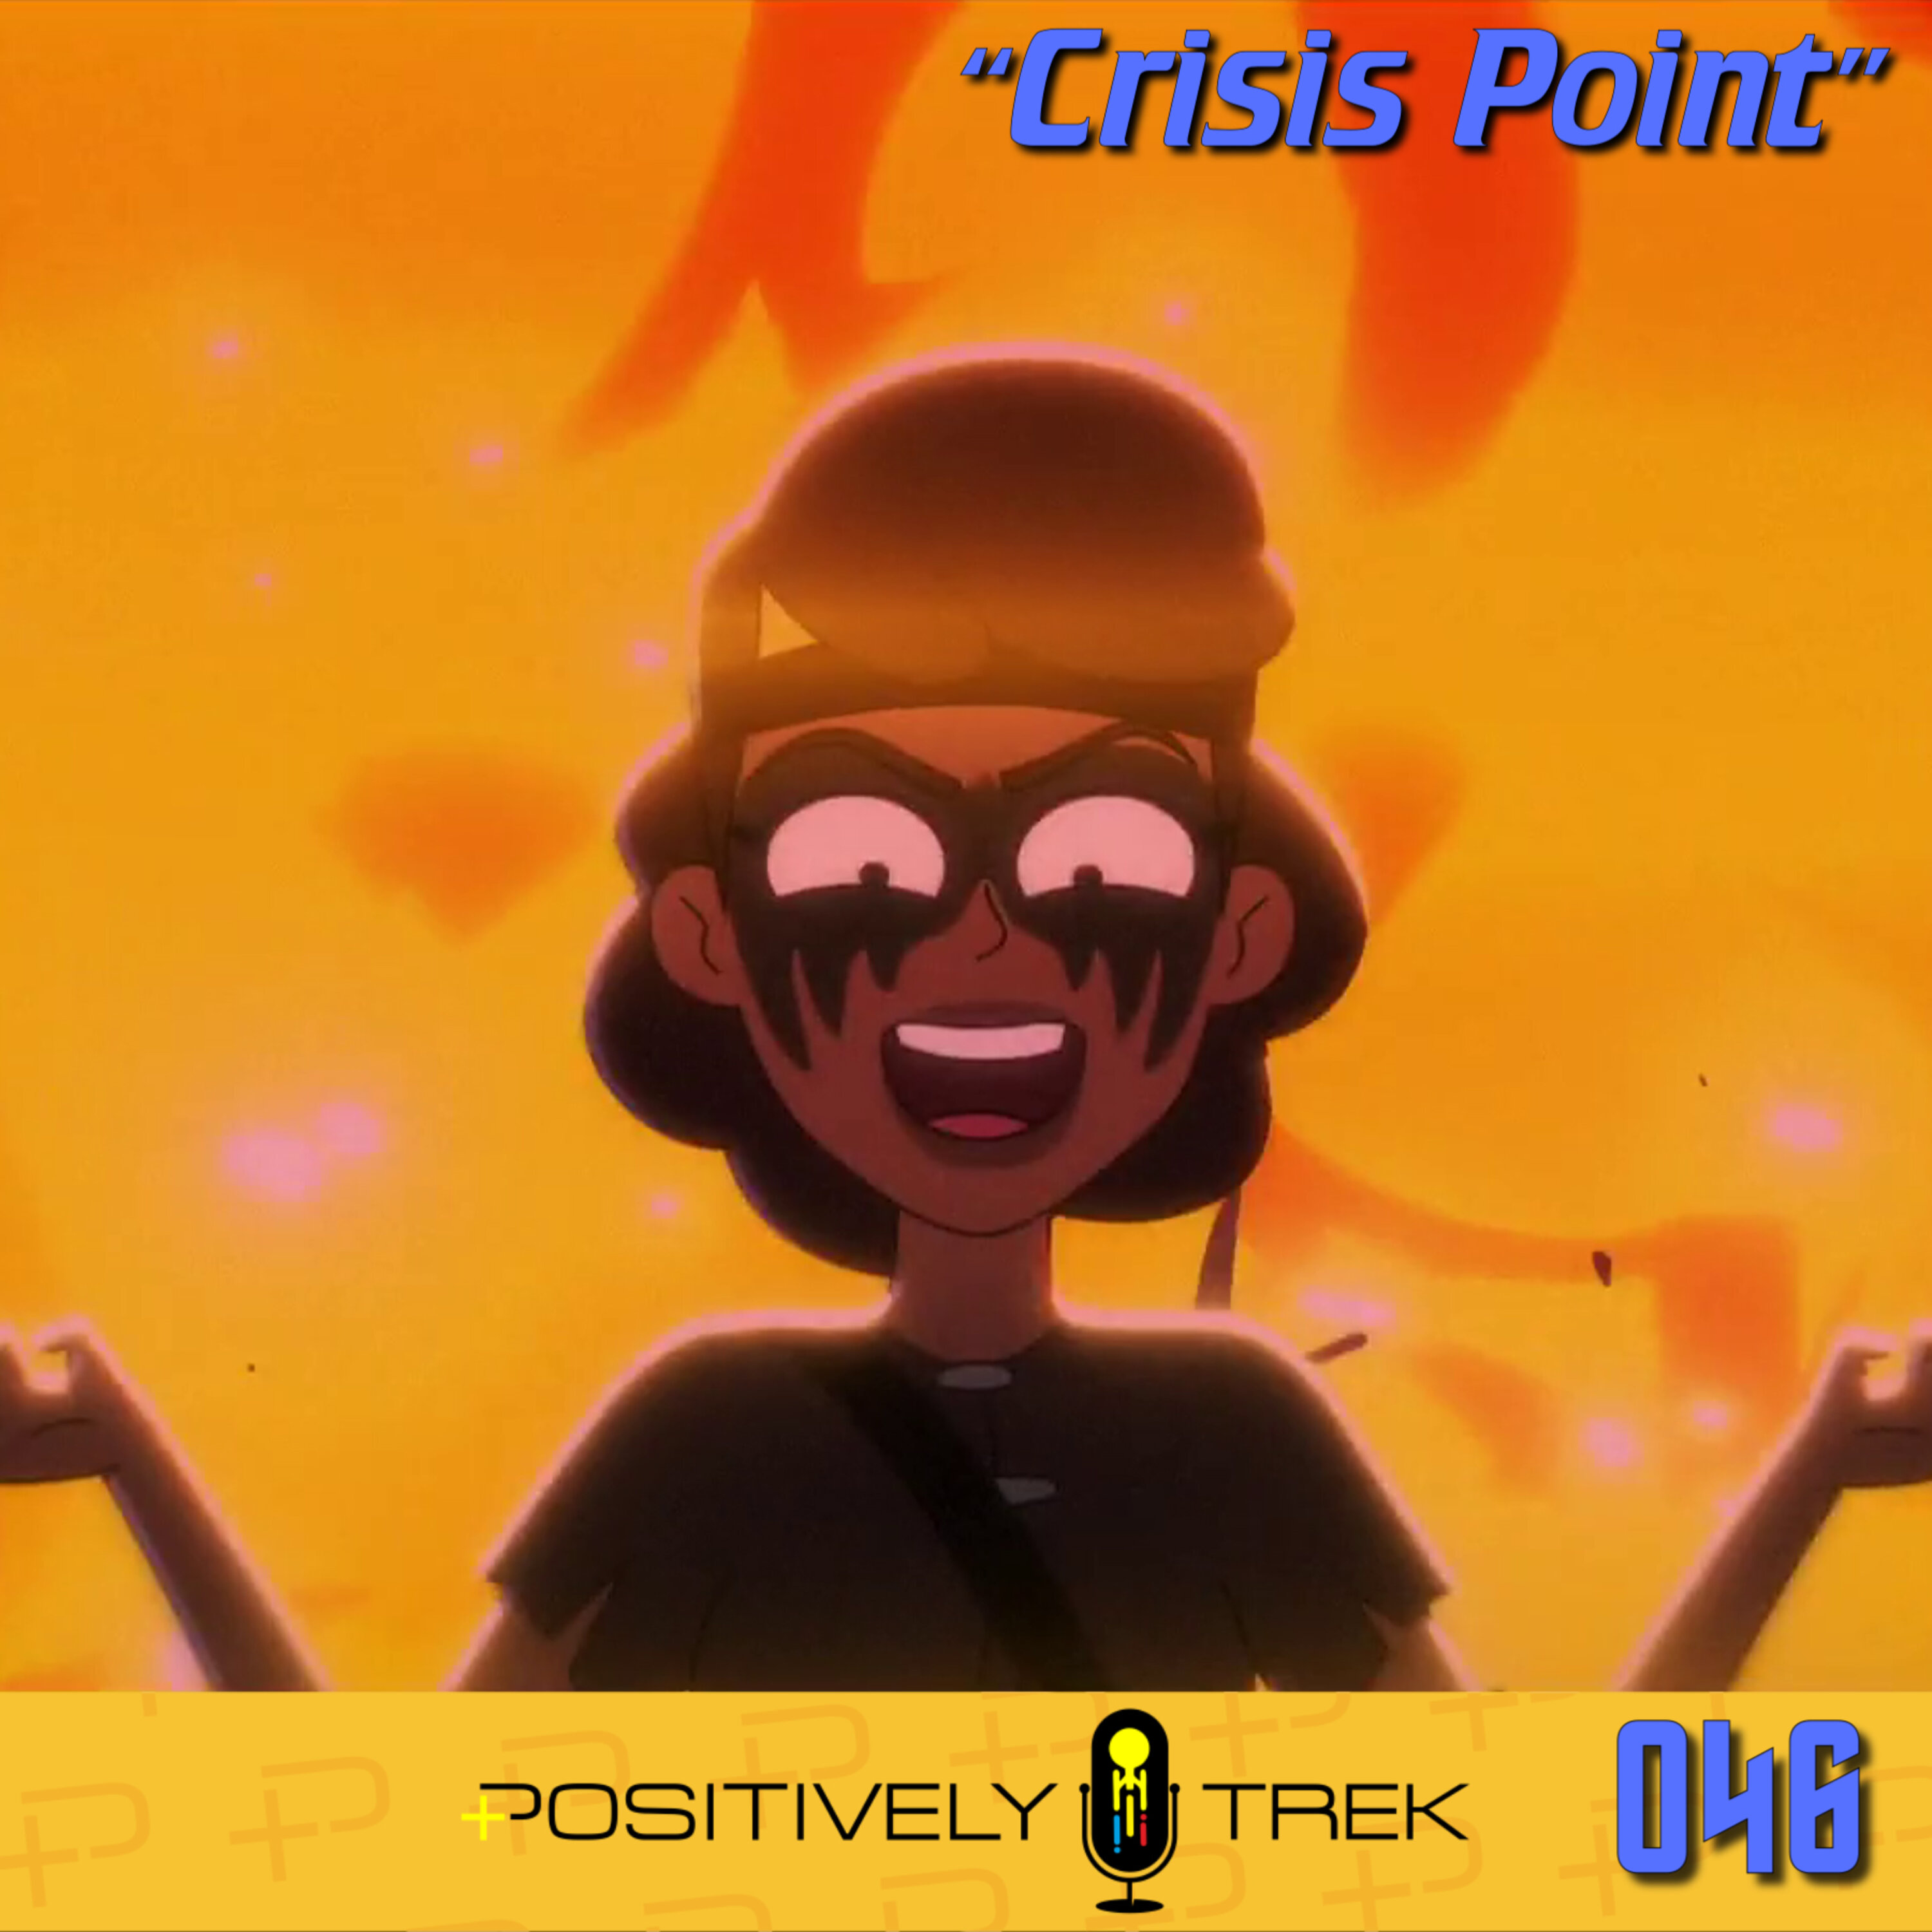 Lower Decks Review: “Crisis Point” (1.09) Image